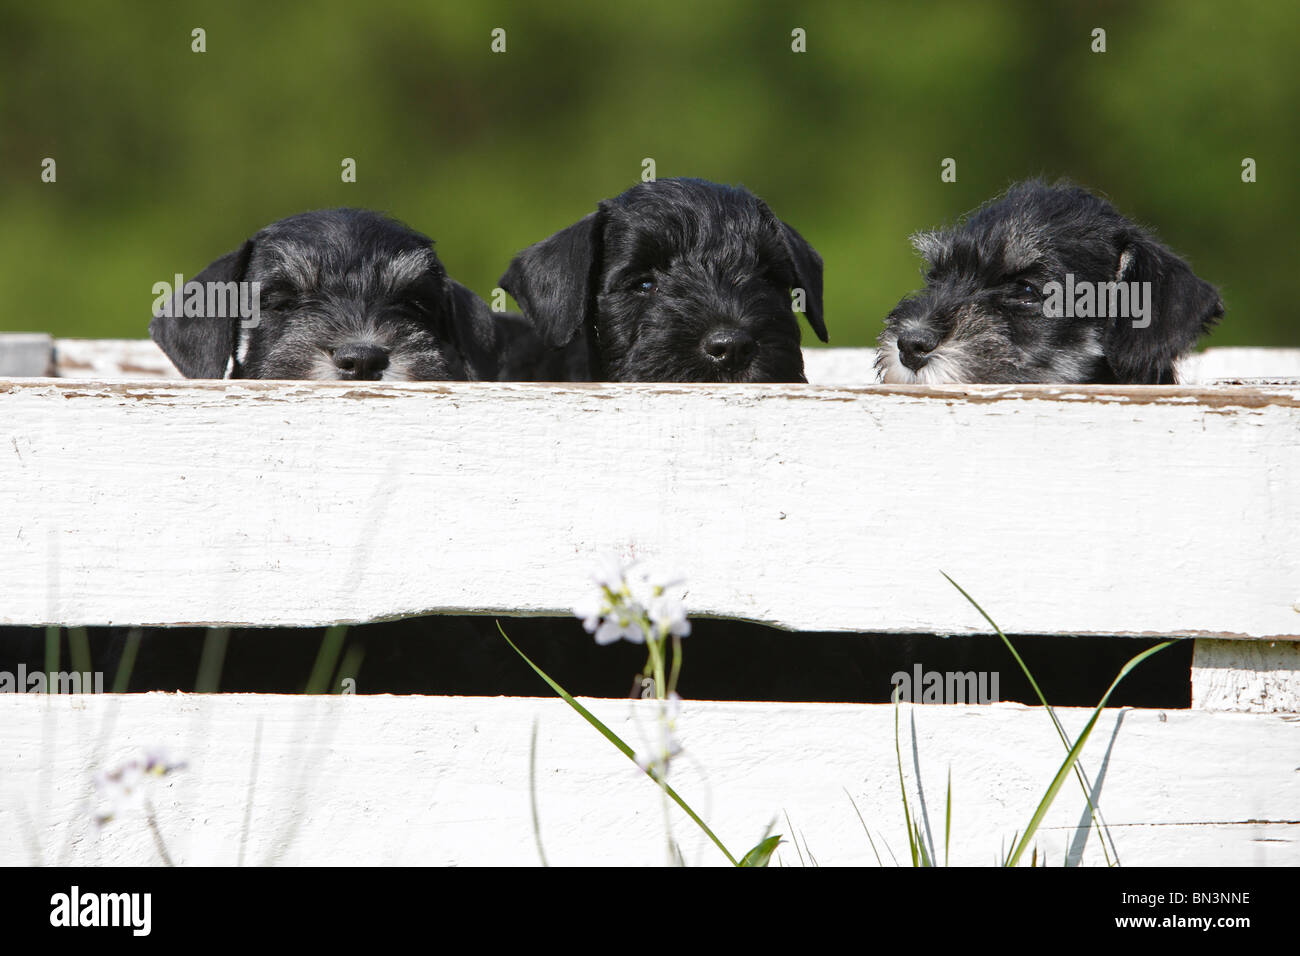 Miniature Schnauzer (Canis lupus f. familiaris), three puppies in a wooden box, Germany Stock Photo